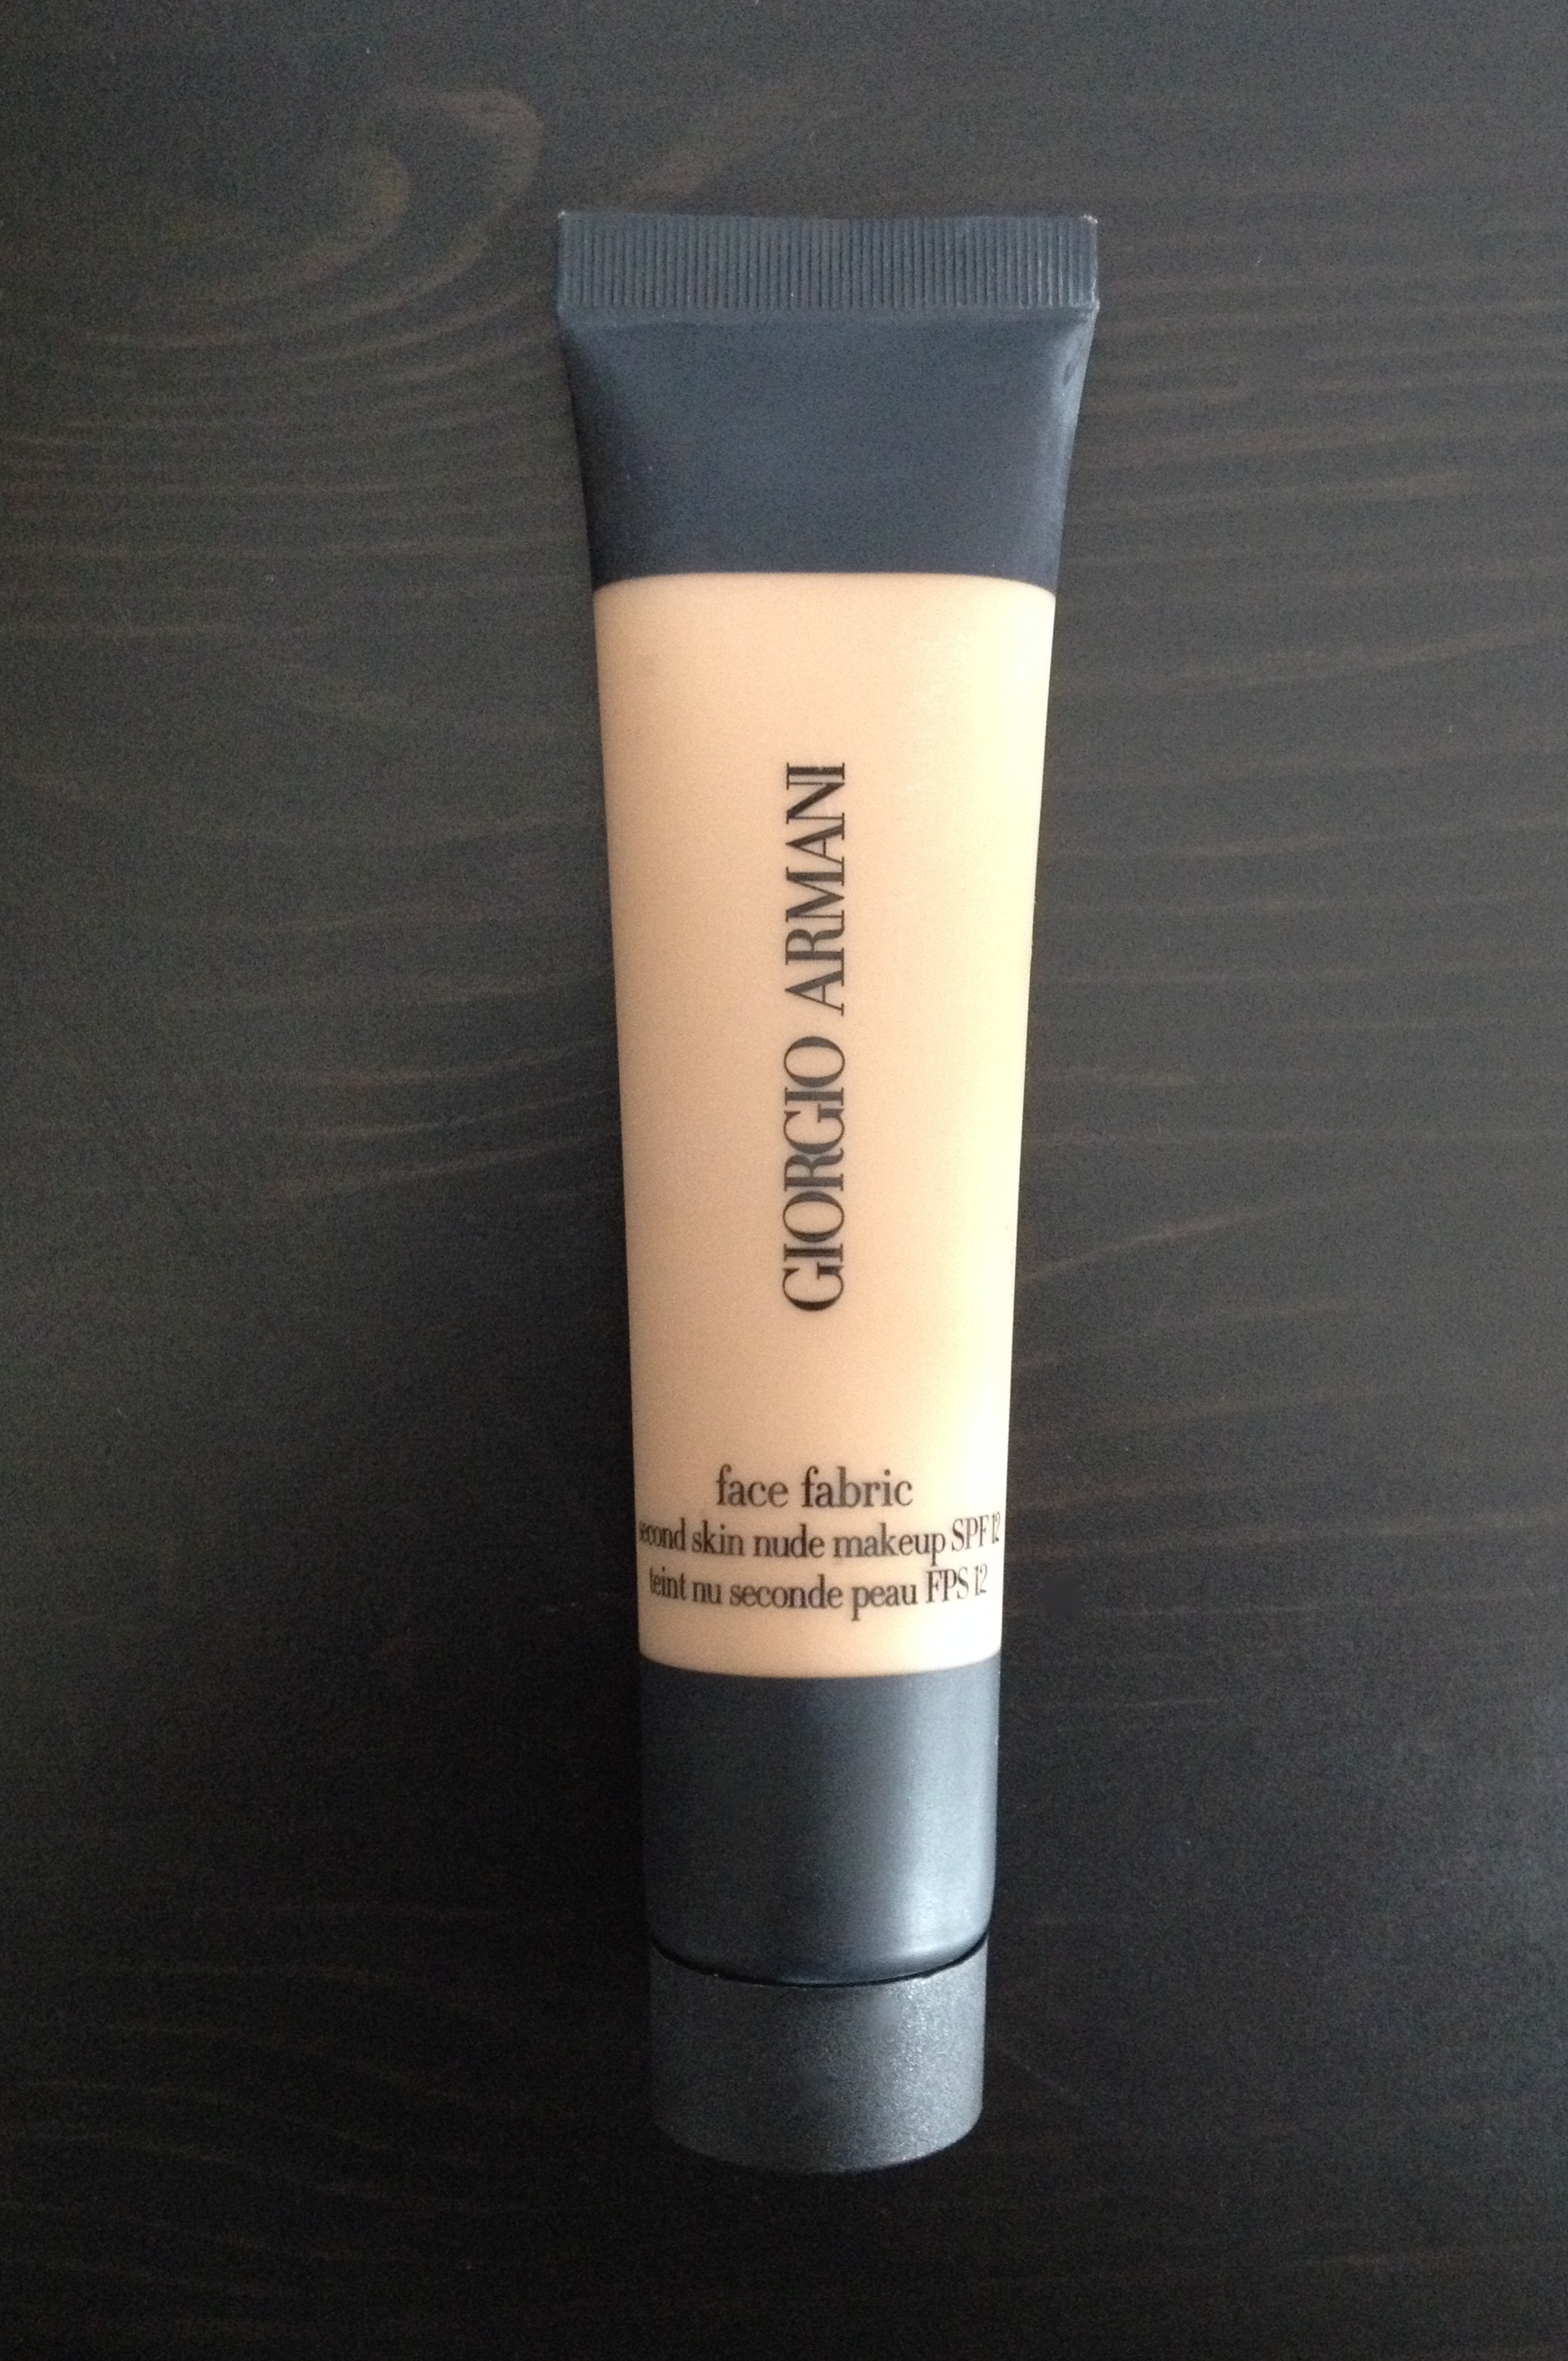 armani face fabric review